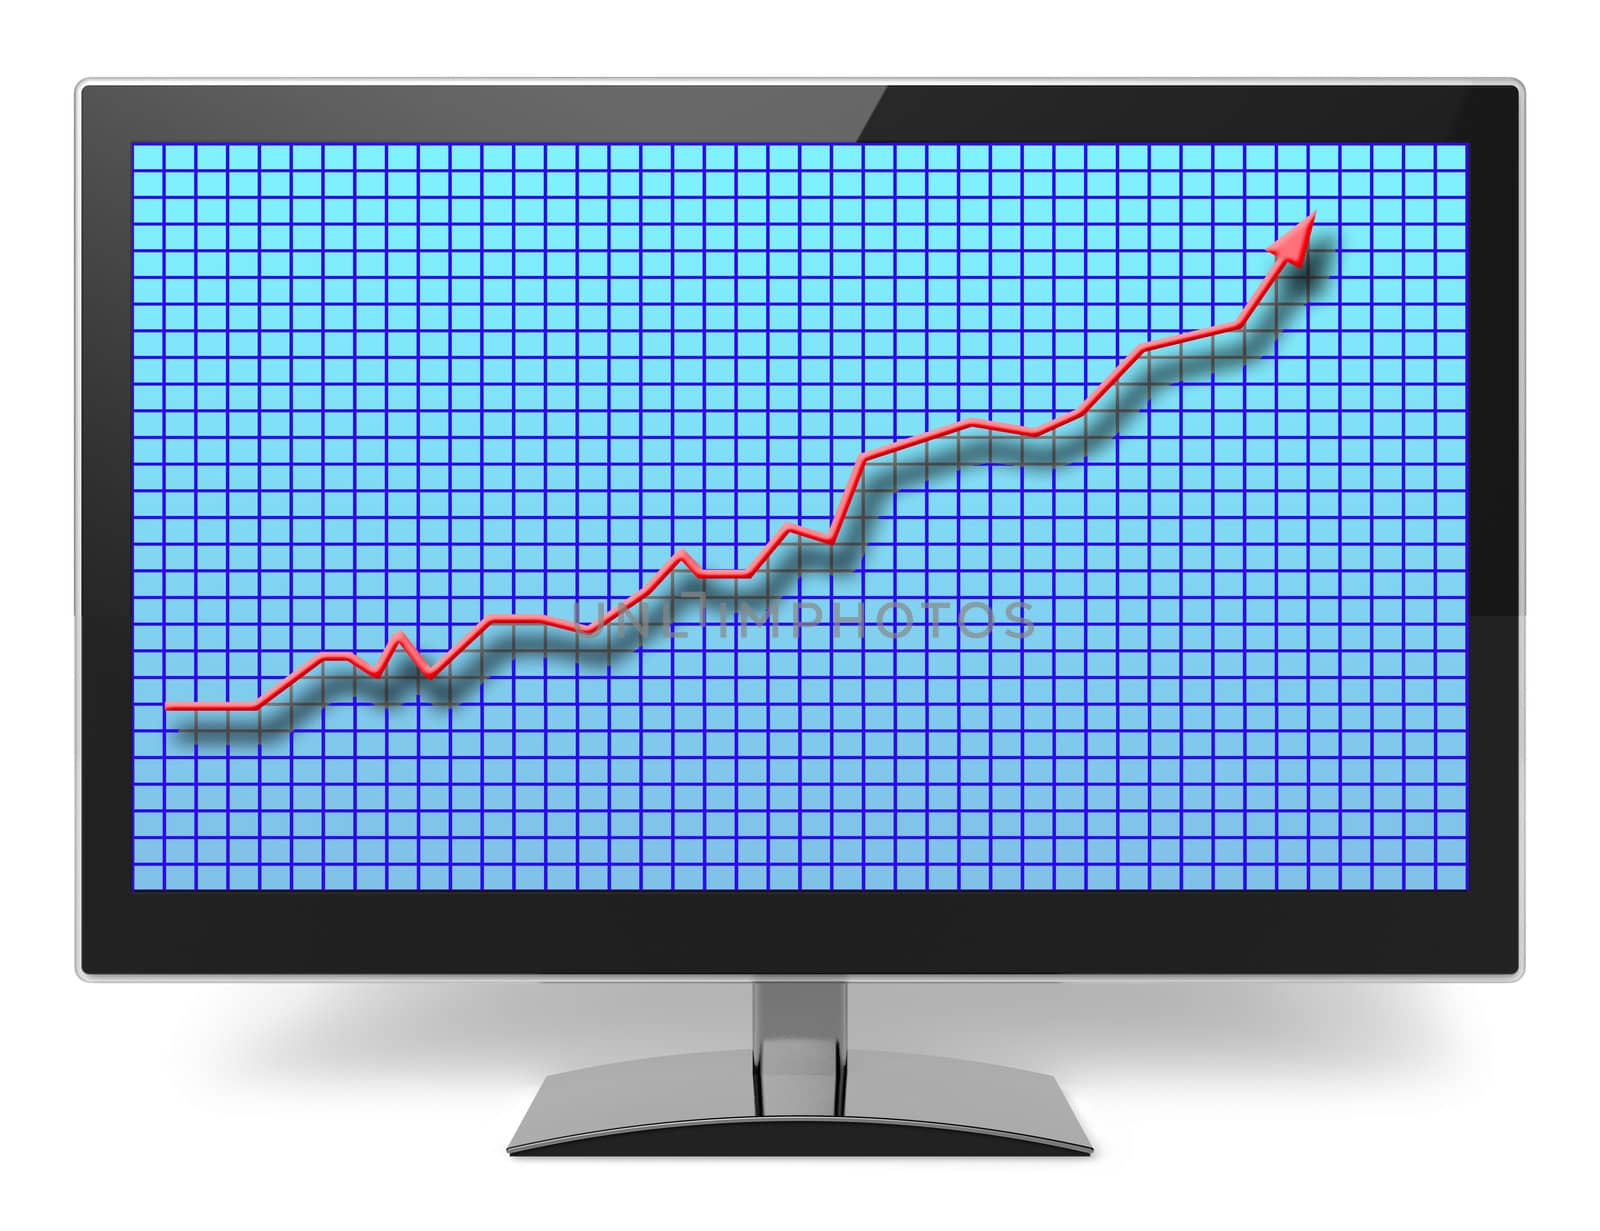 Blue Lcd Tv Monitor with graph by jasminmuratovic